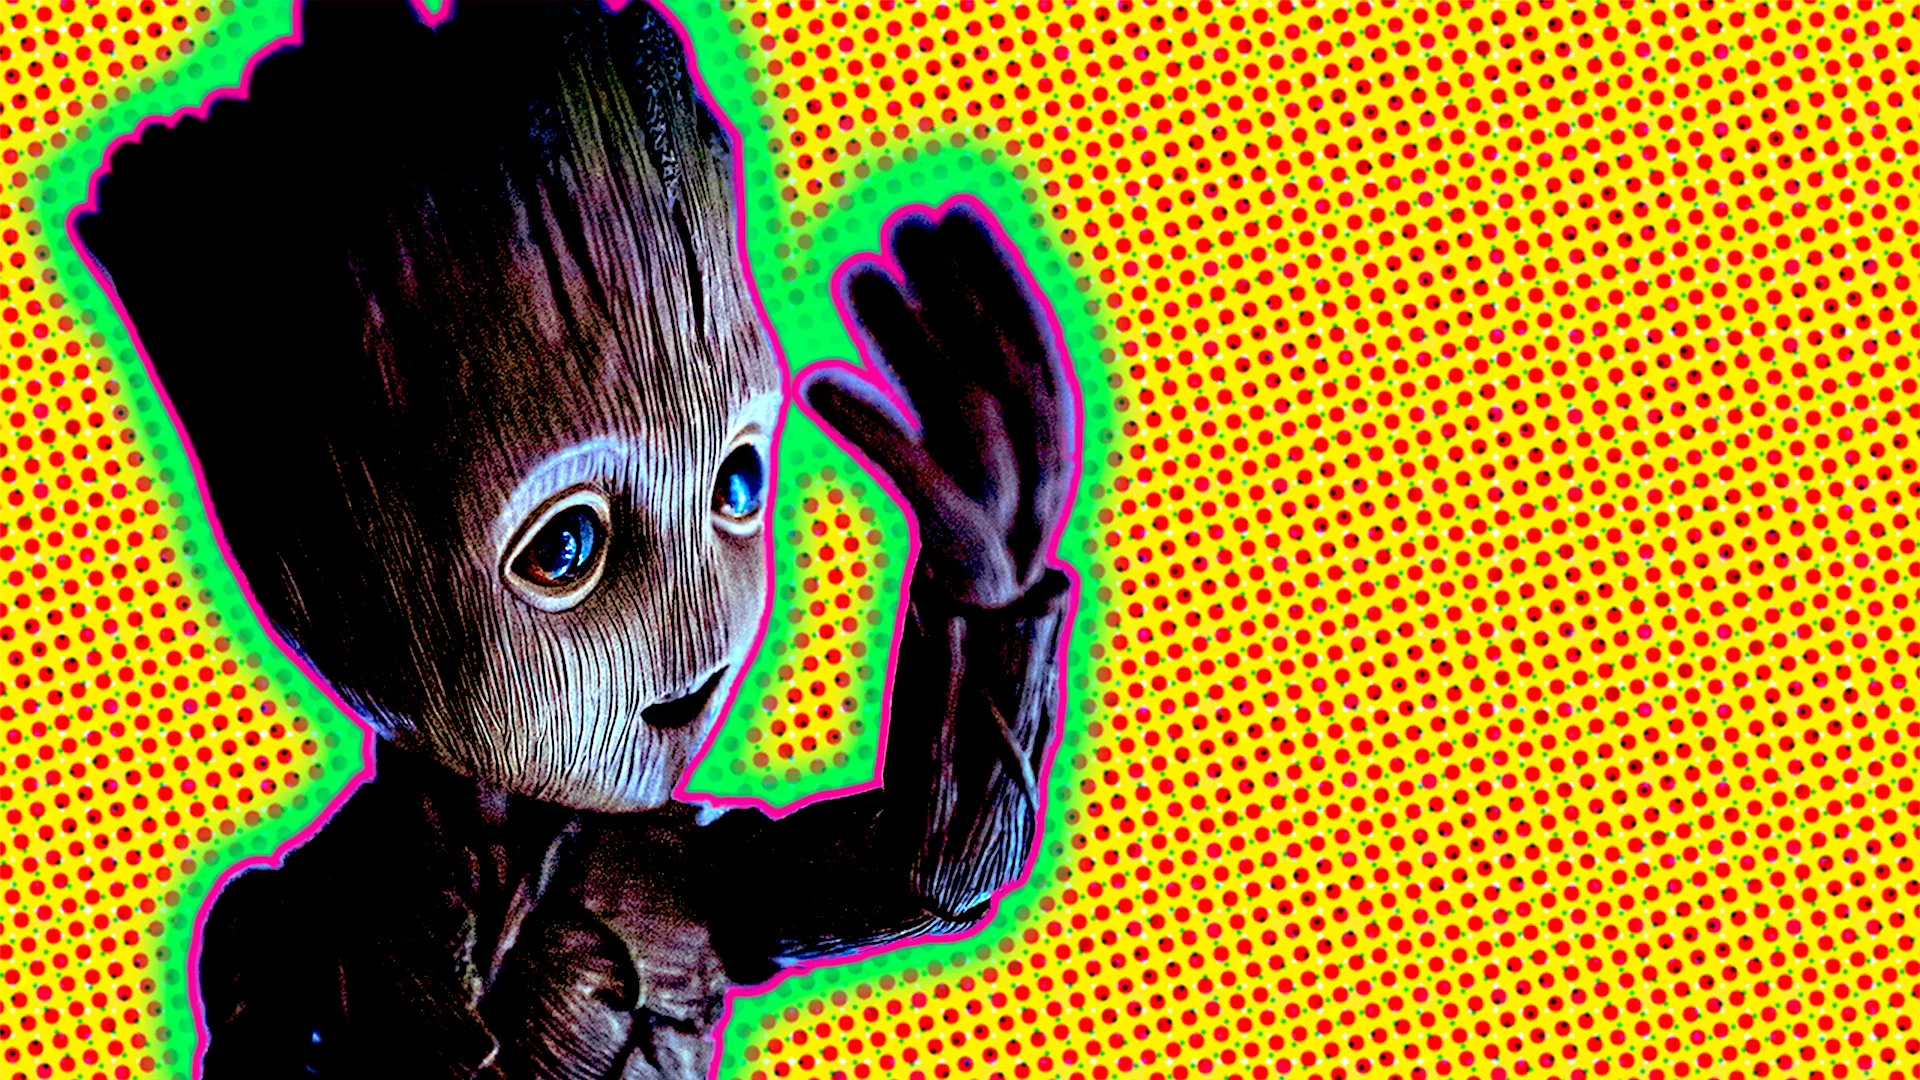 Marvel Groot character with a polkadot background and a glow around the image